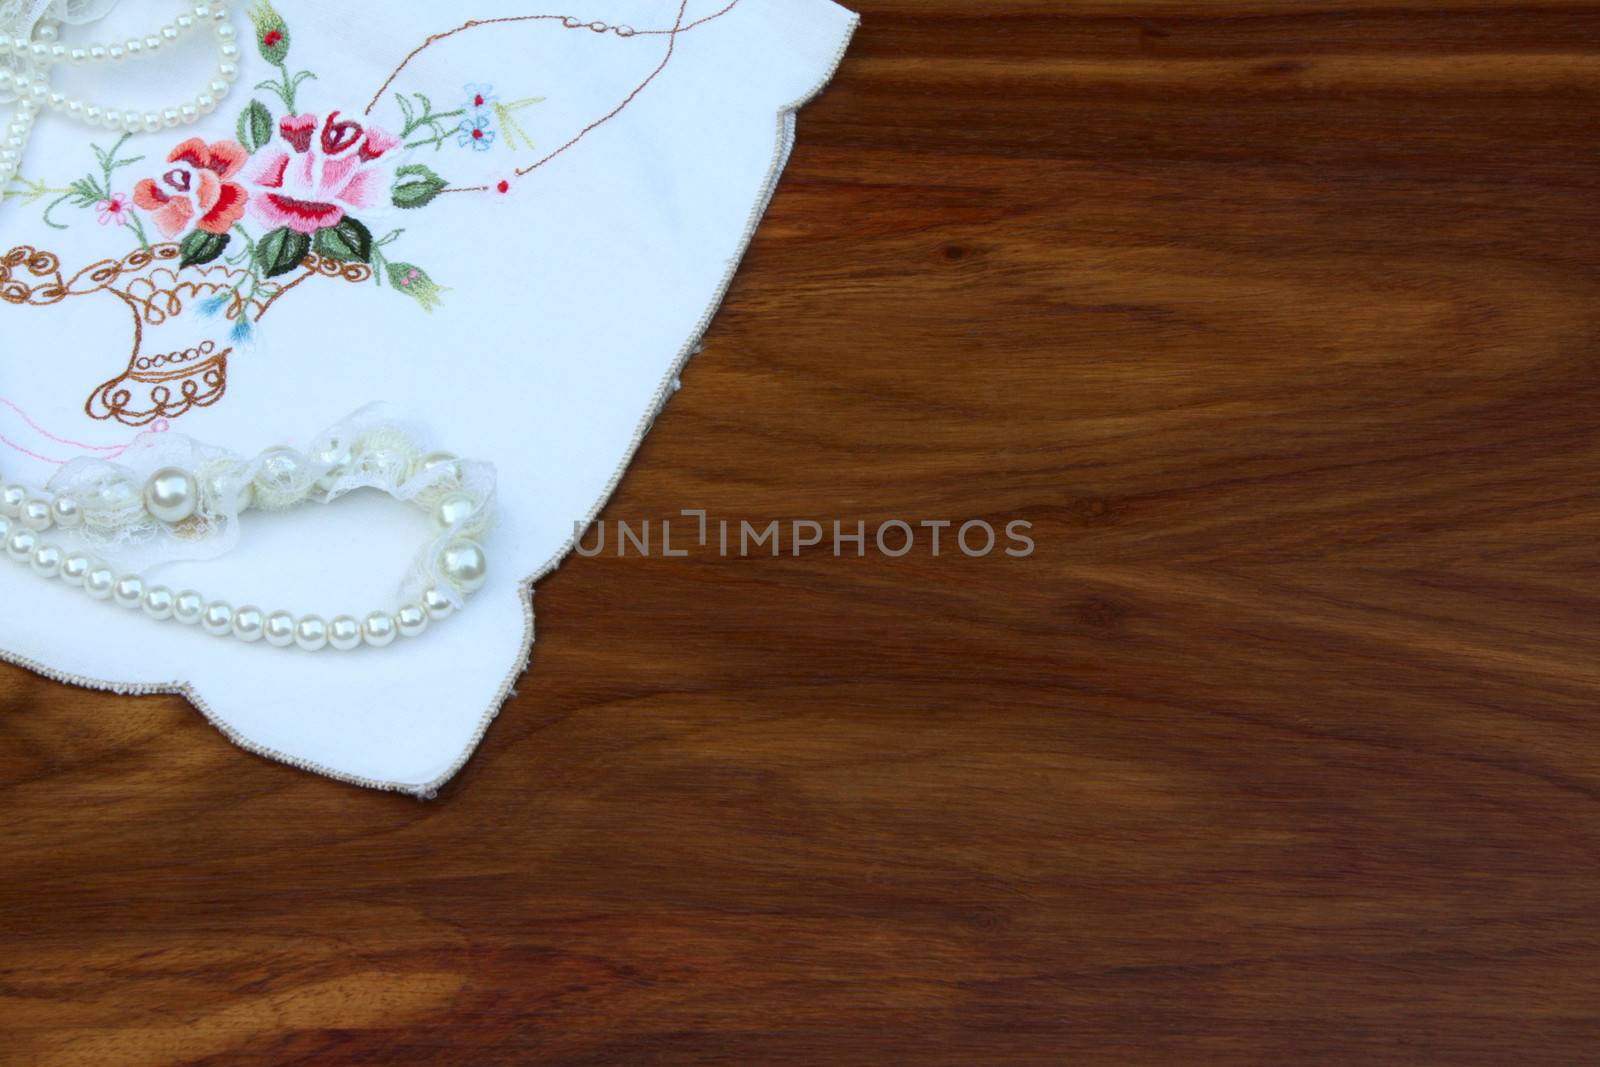 Pearls on embroidered cloth over wooden table